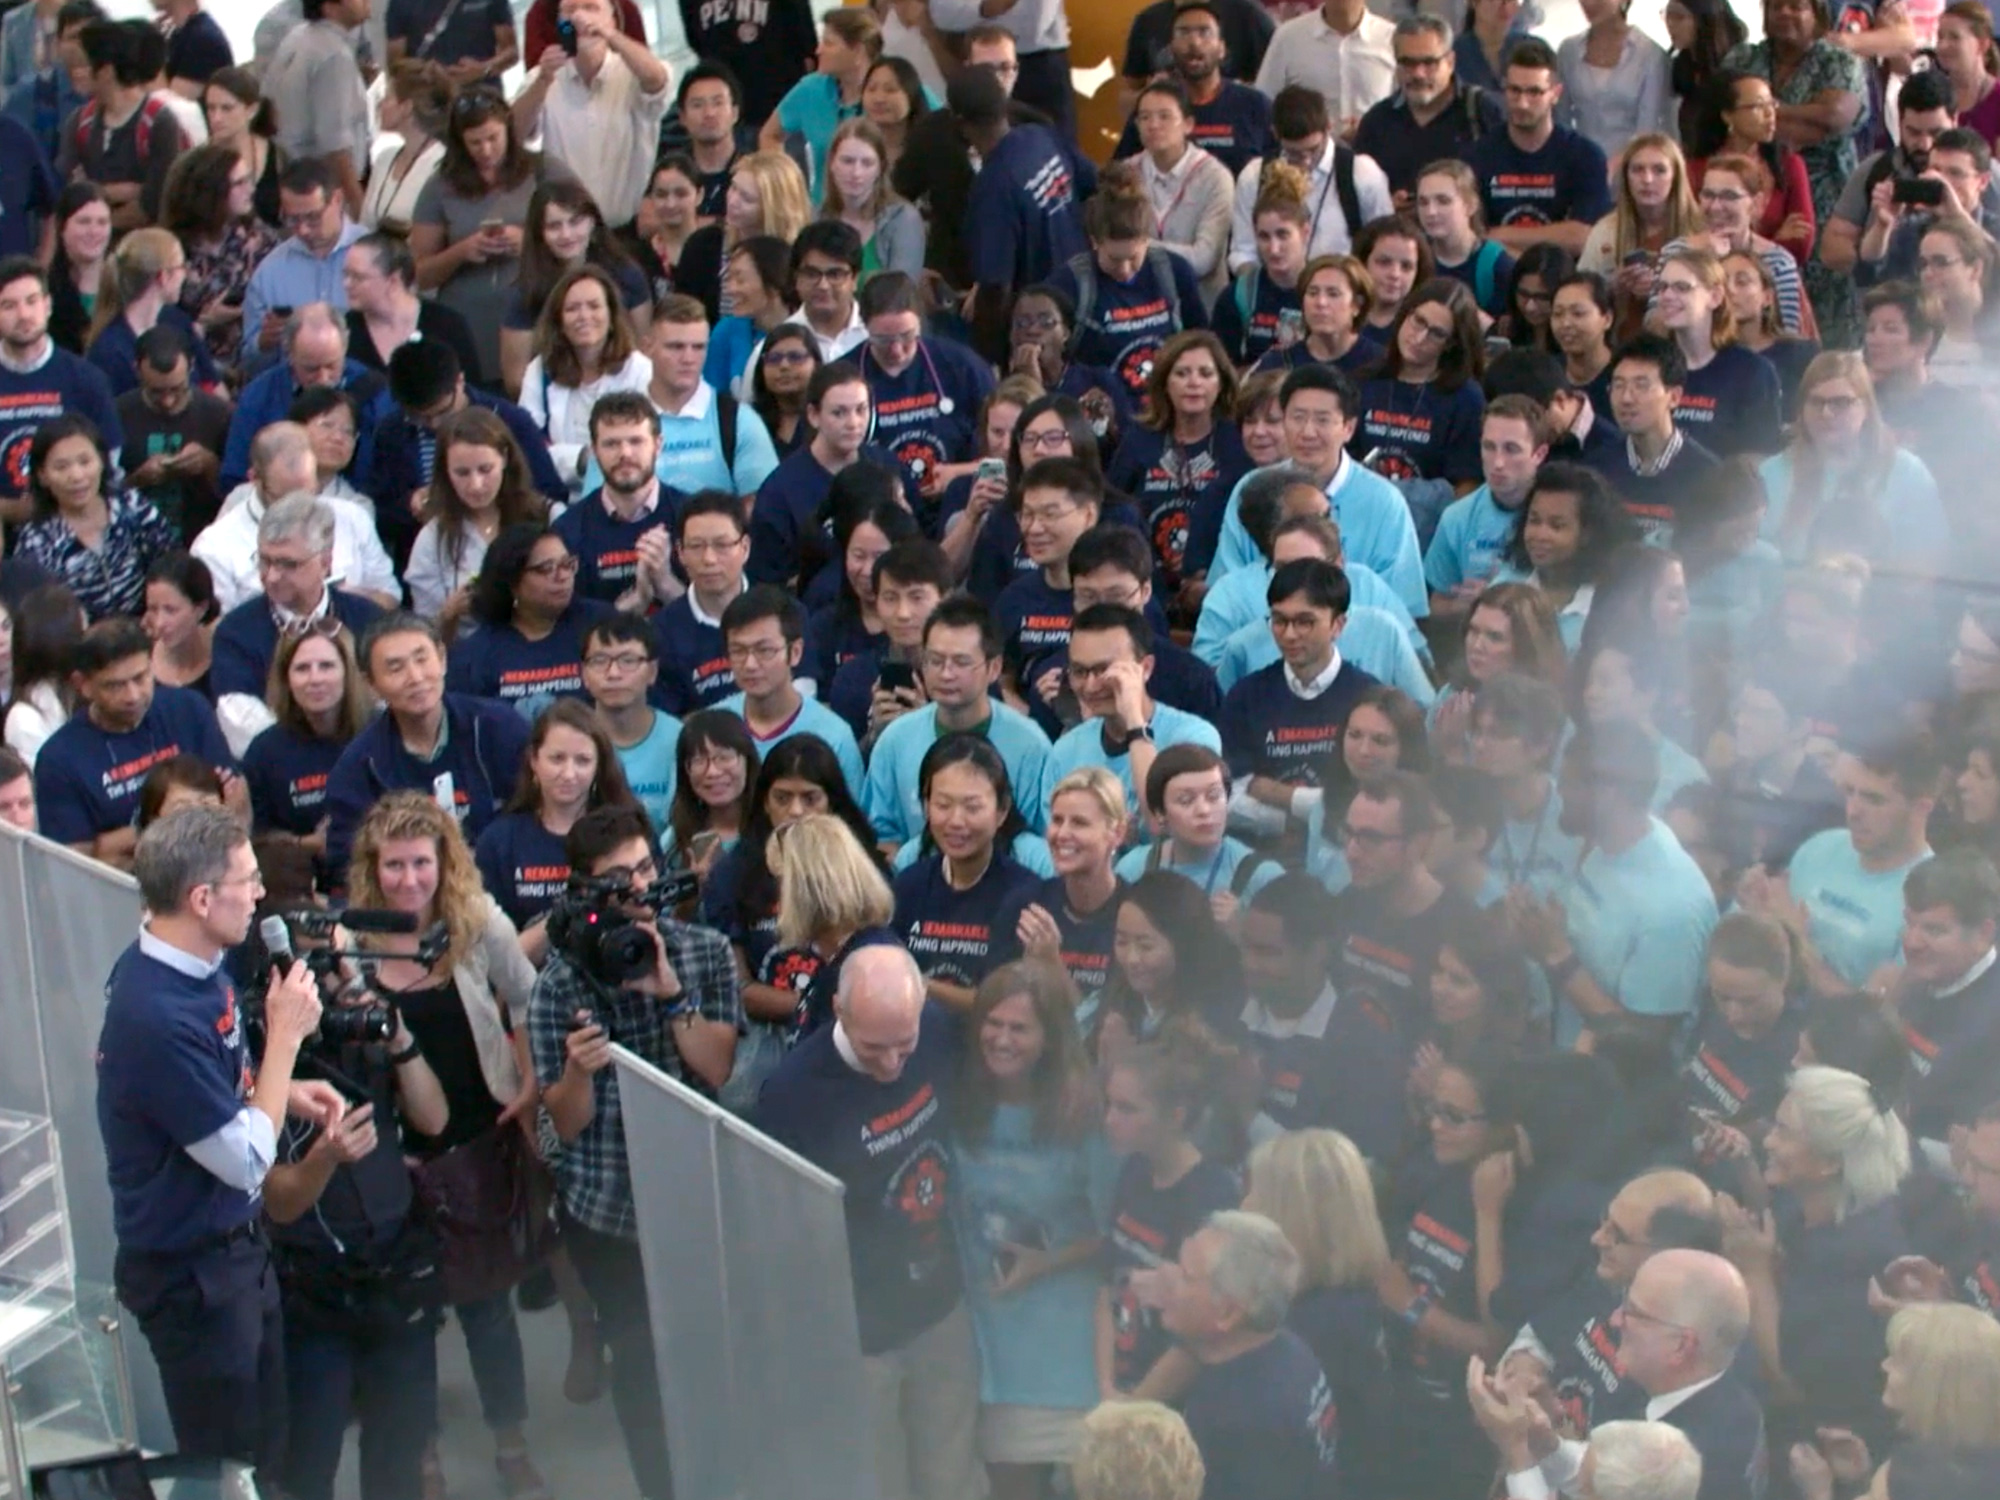 A man with a microphone, at left, addresses a crowd of people wearing Penn Immunotherapy T-shirts.